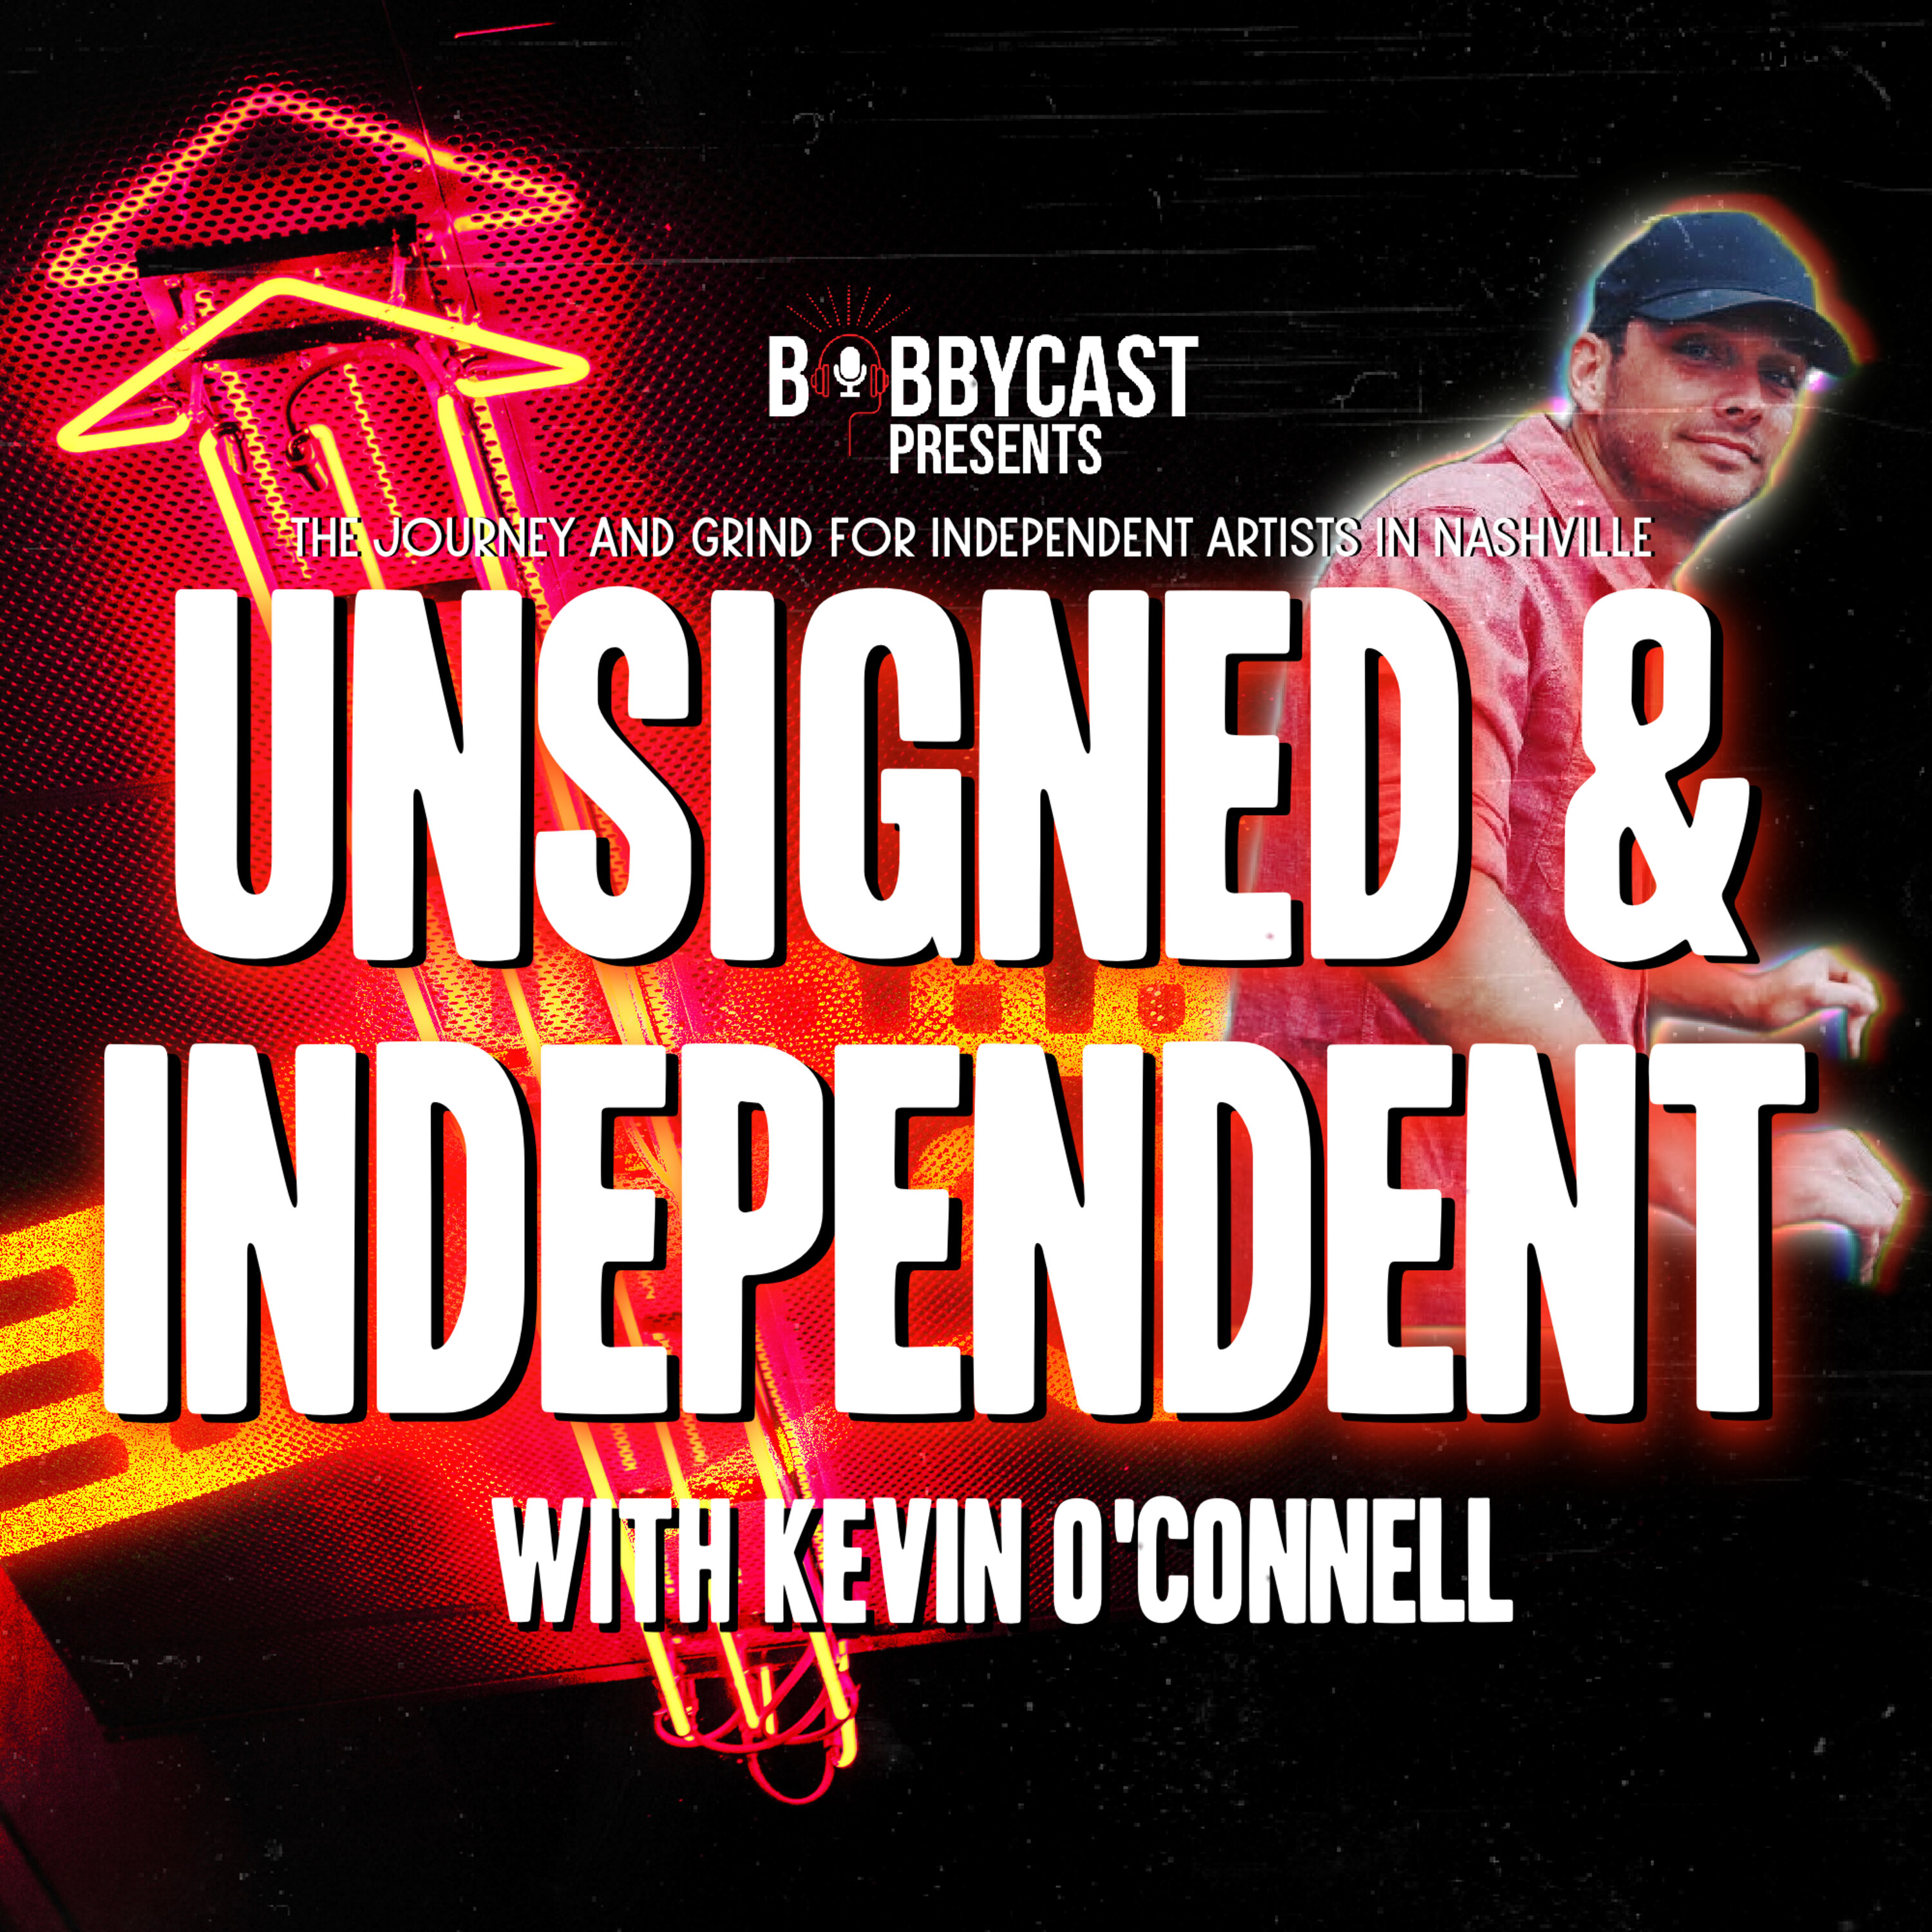 BobbyCast Presents: Unsigned & Independent:  Erin Viancourt - Learning From an Independent Legend